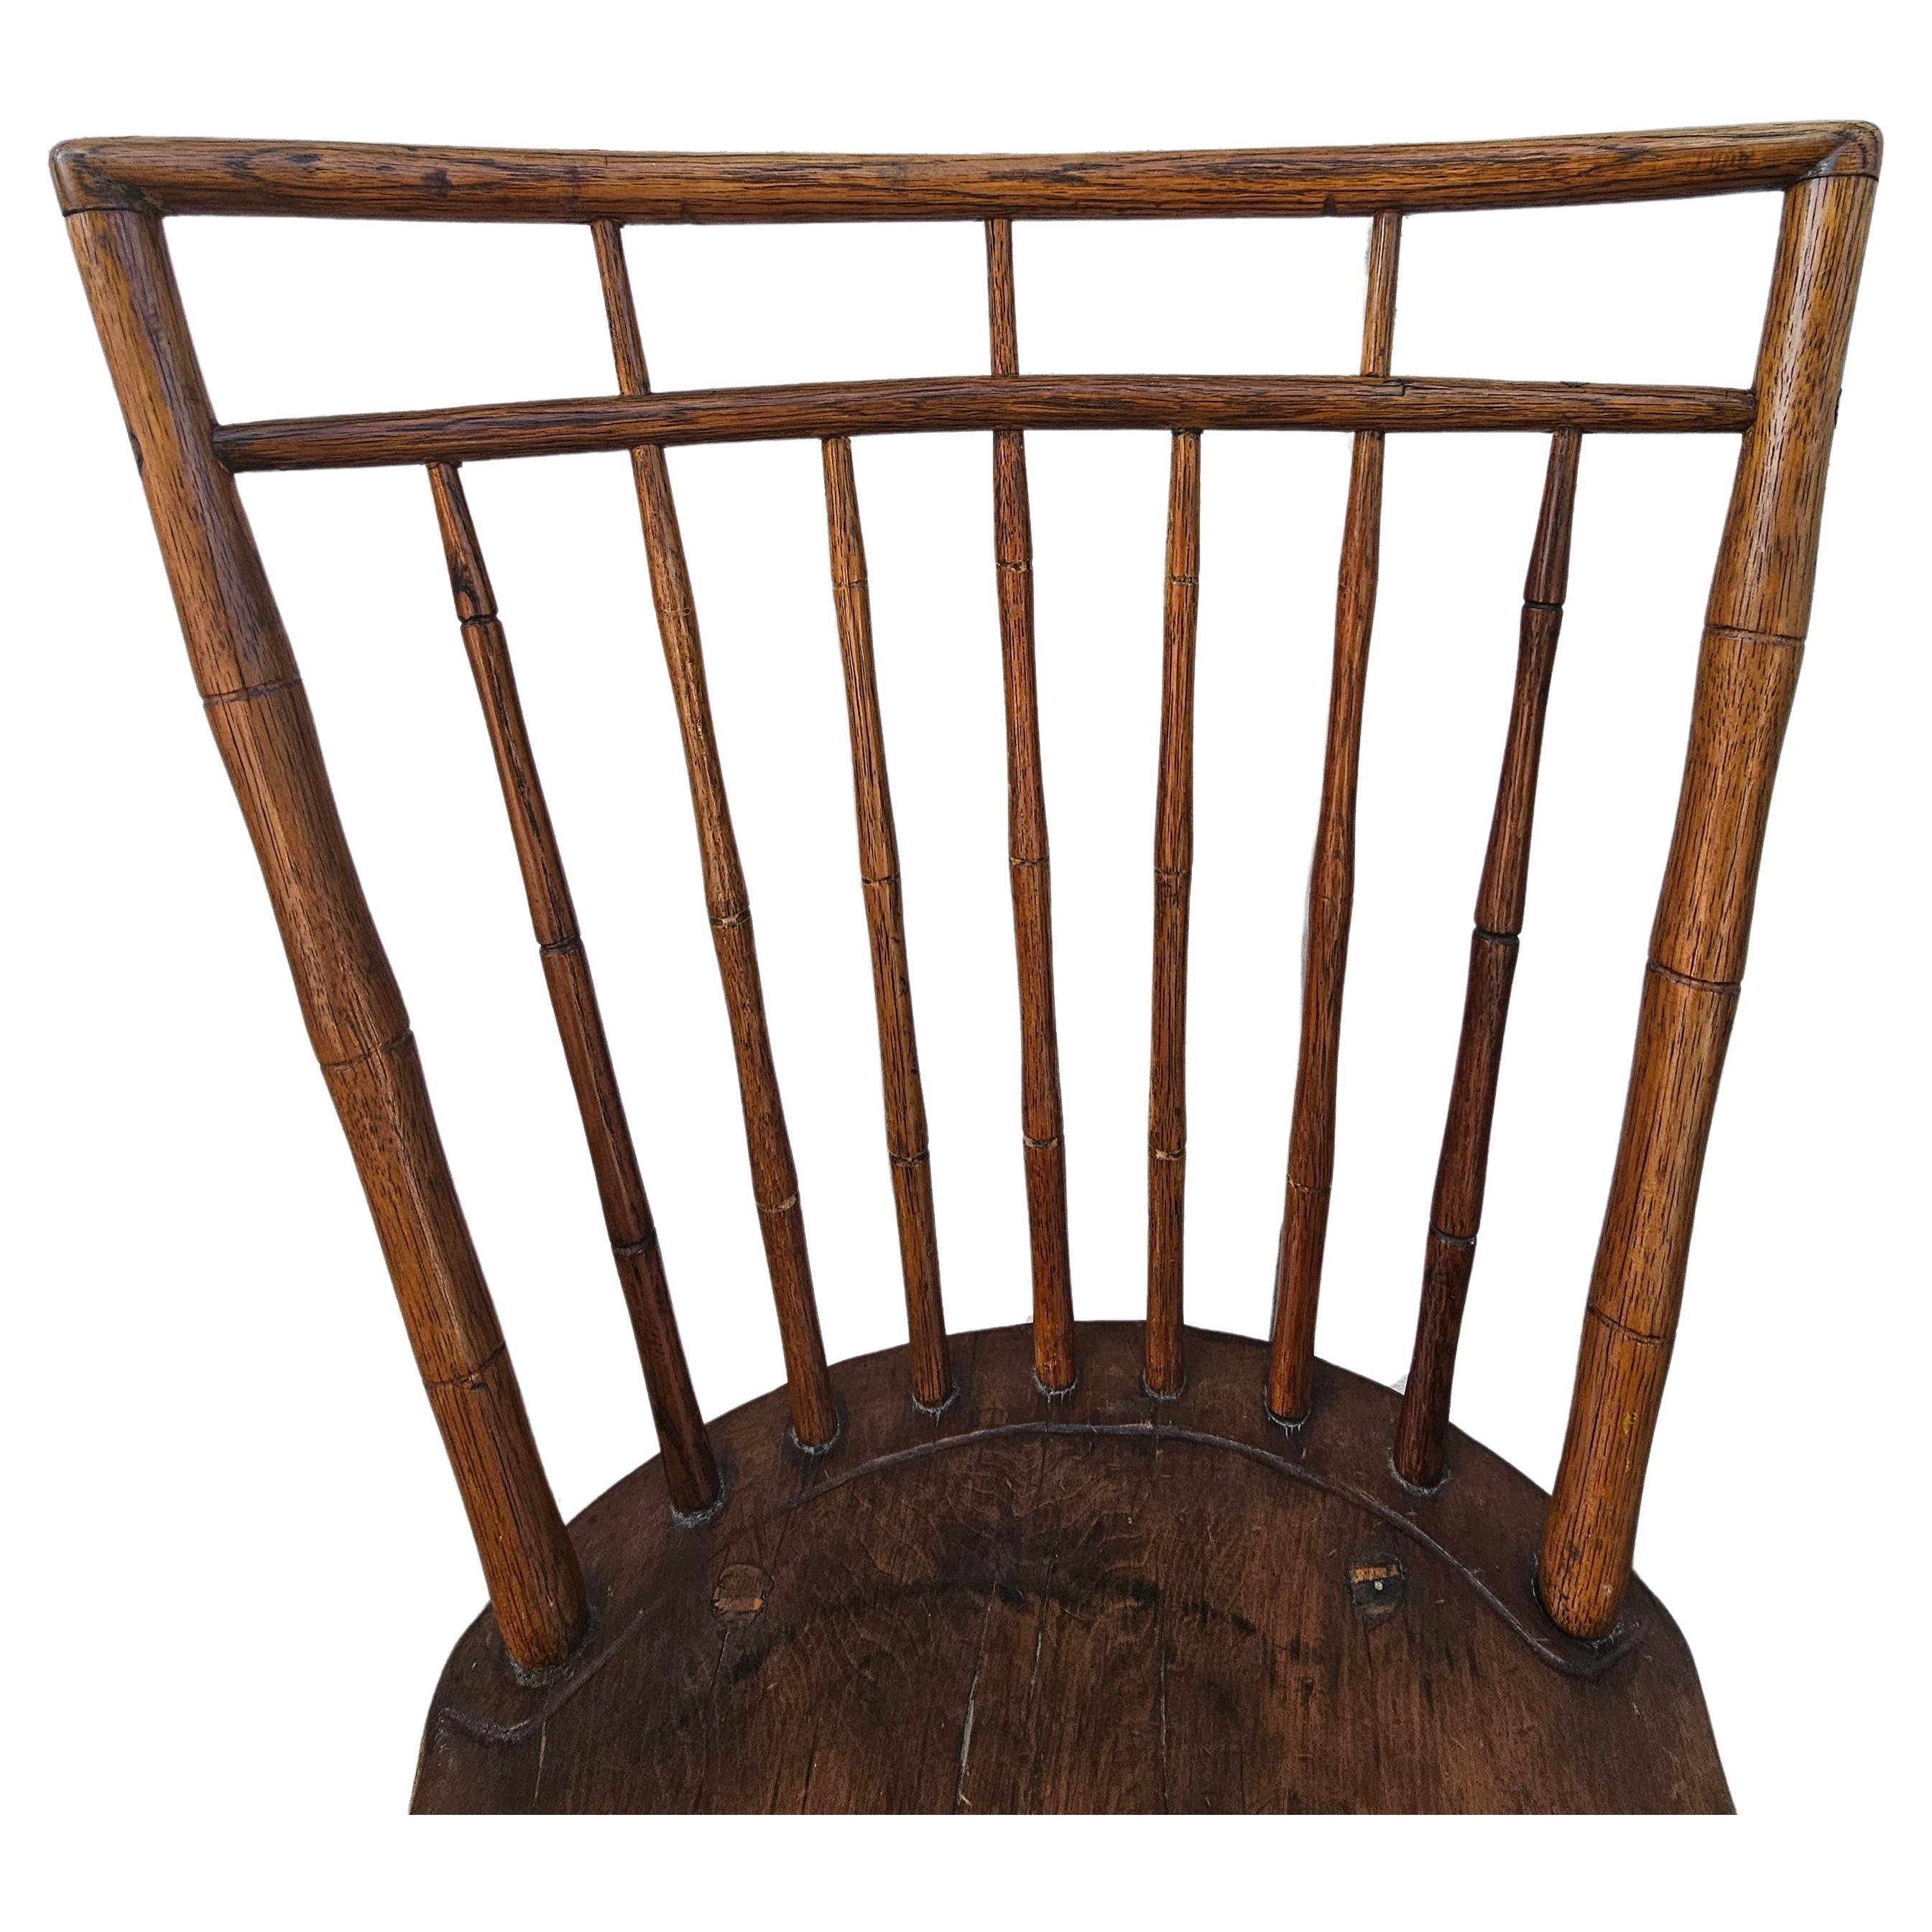 Hand-Crafted 19th Century Early American Elm Windsor Plank Chair For Sale